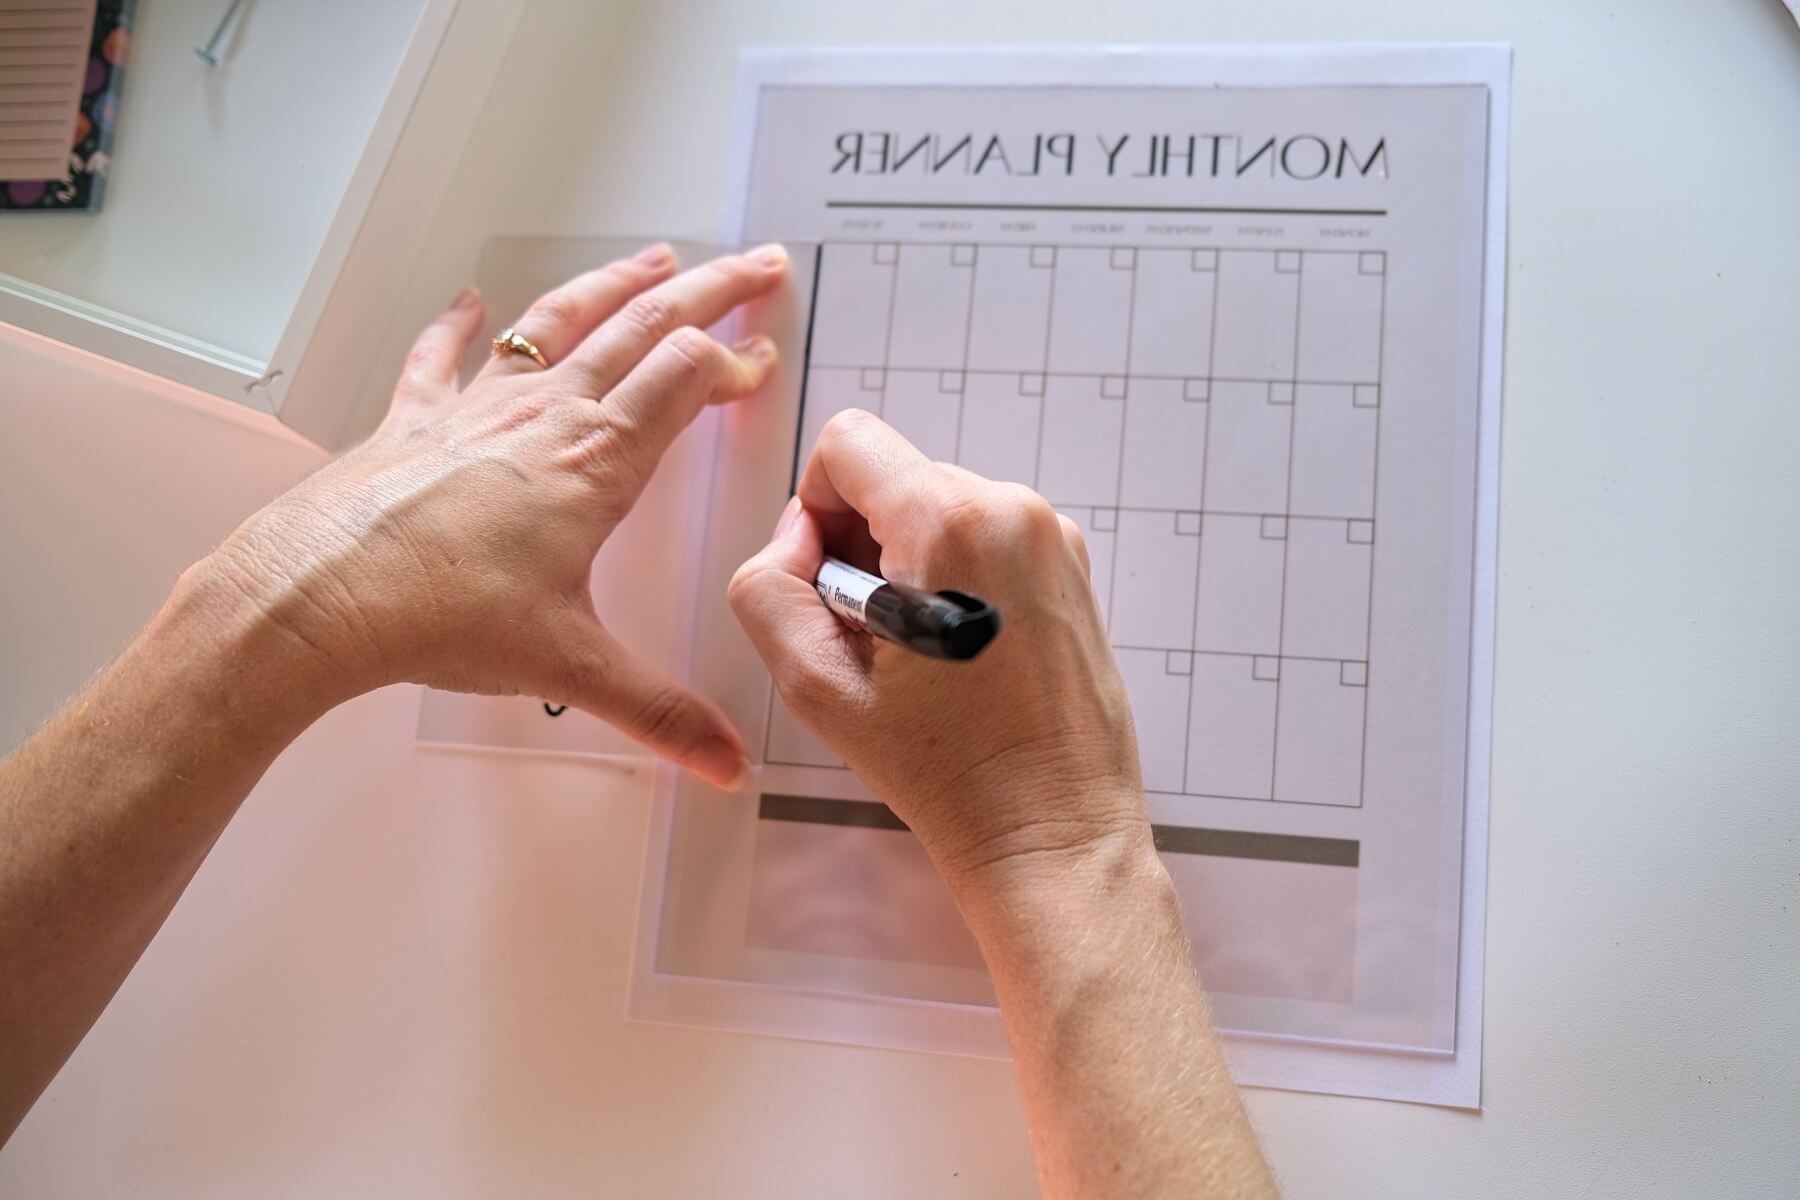 use a ruler or frame to draw the lines of the calendar